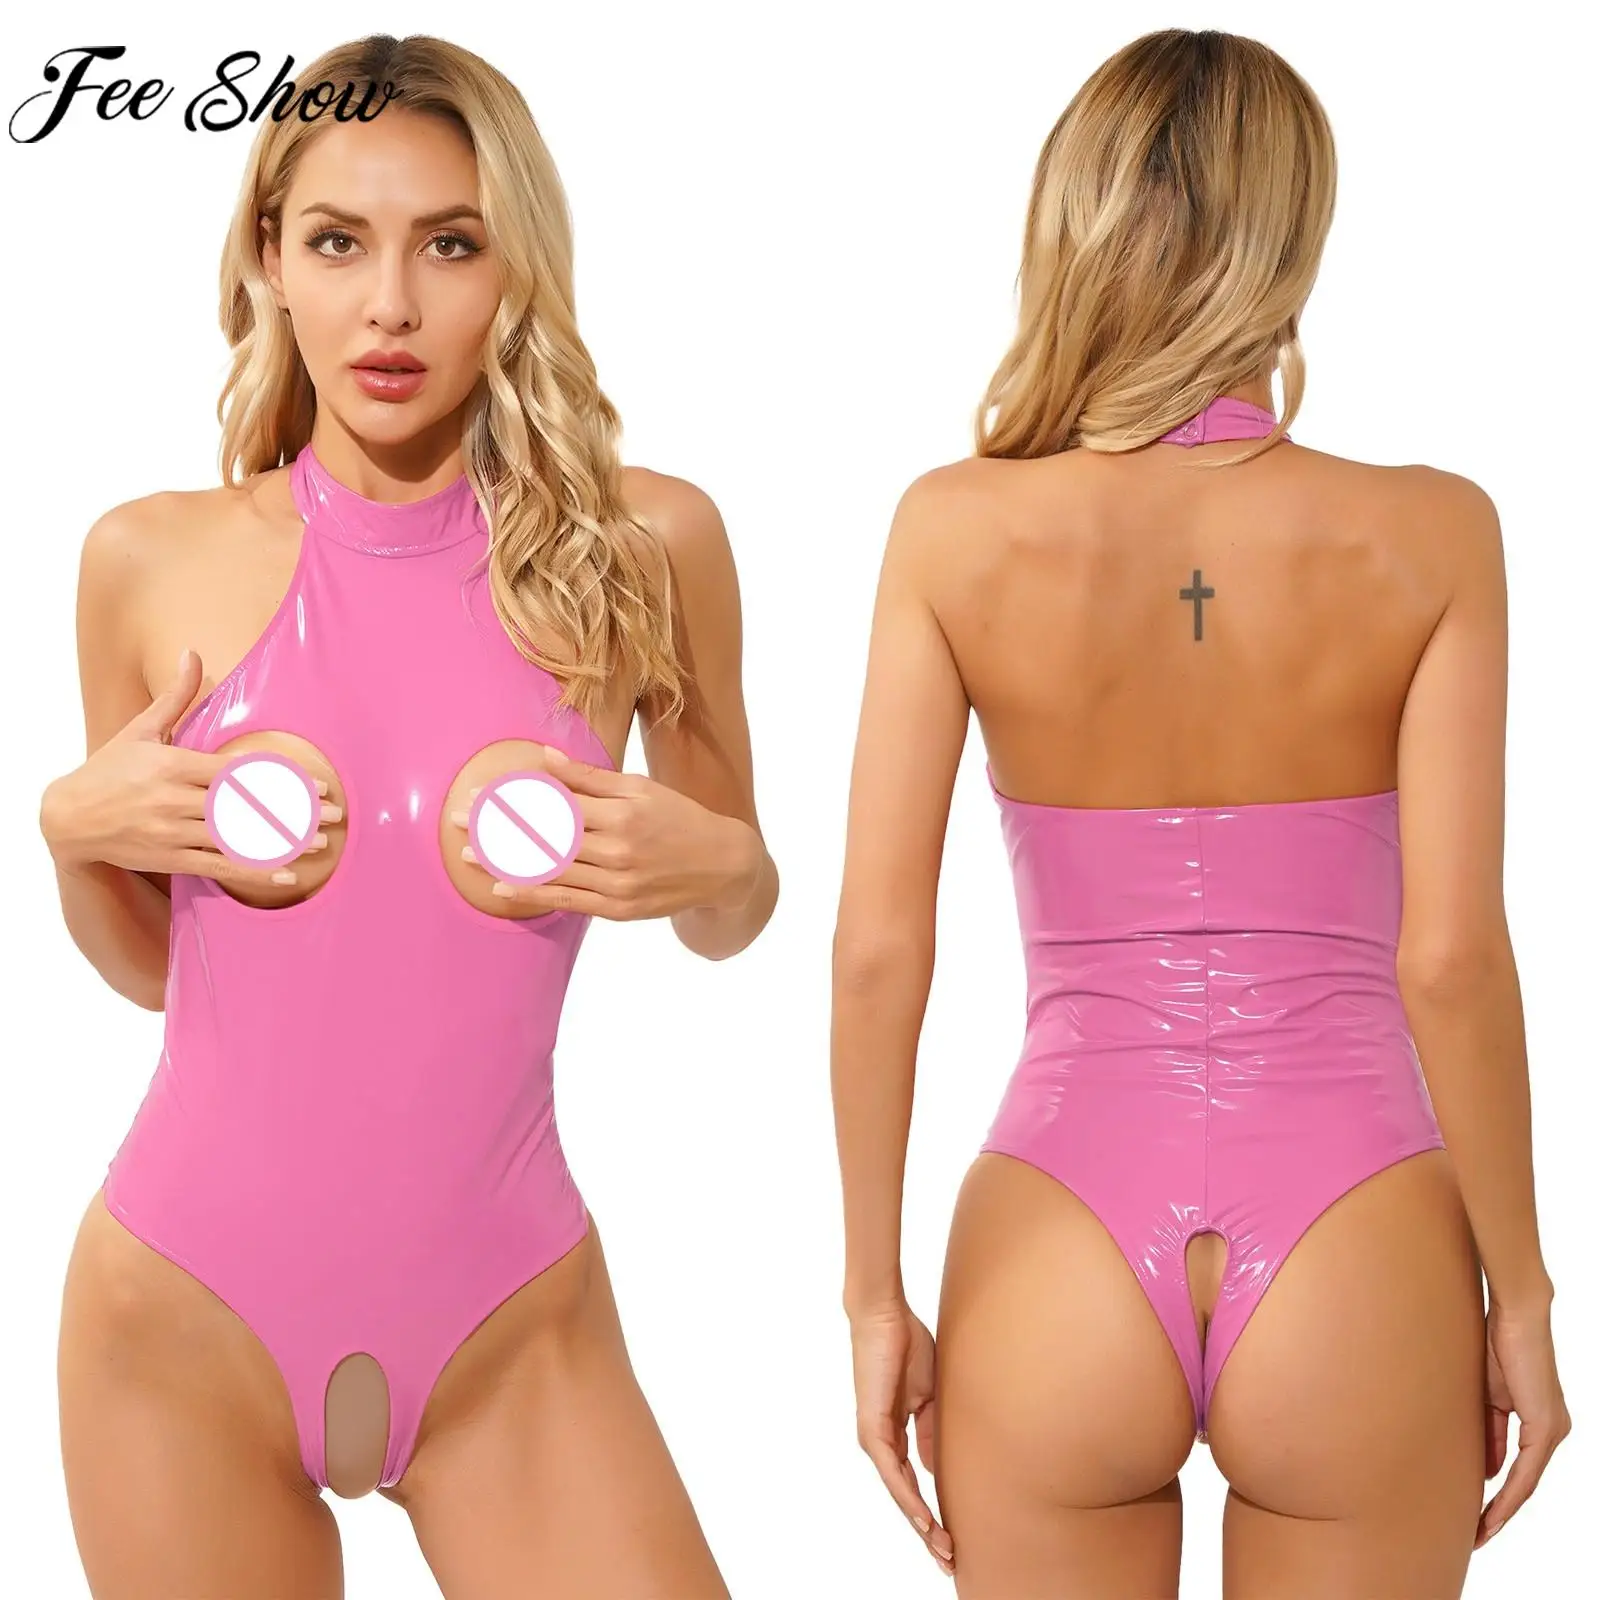 

Womens Sexy Open Cups Crotchless Bodysuit Wet Look Patent Leather Catsuit Halter Backless Leotard Lingerie Nightwear Clubwear